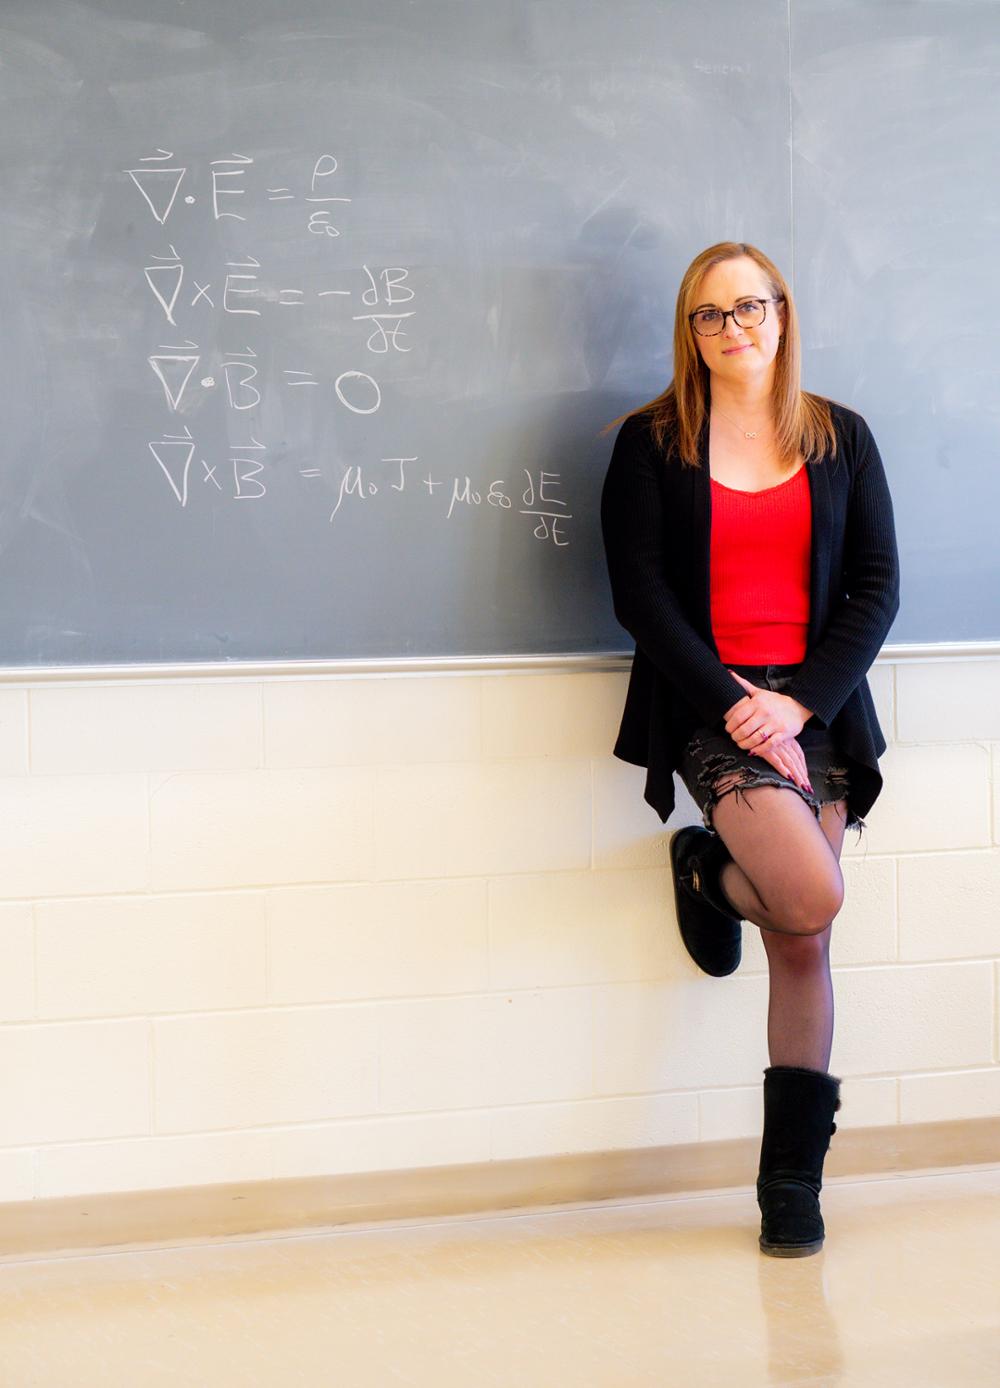 A professor standing in front of a blackboard with physics equations on it